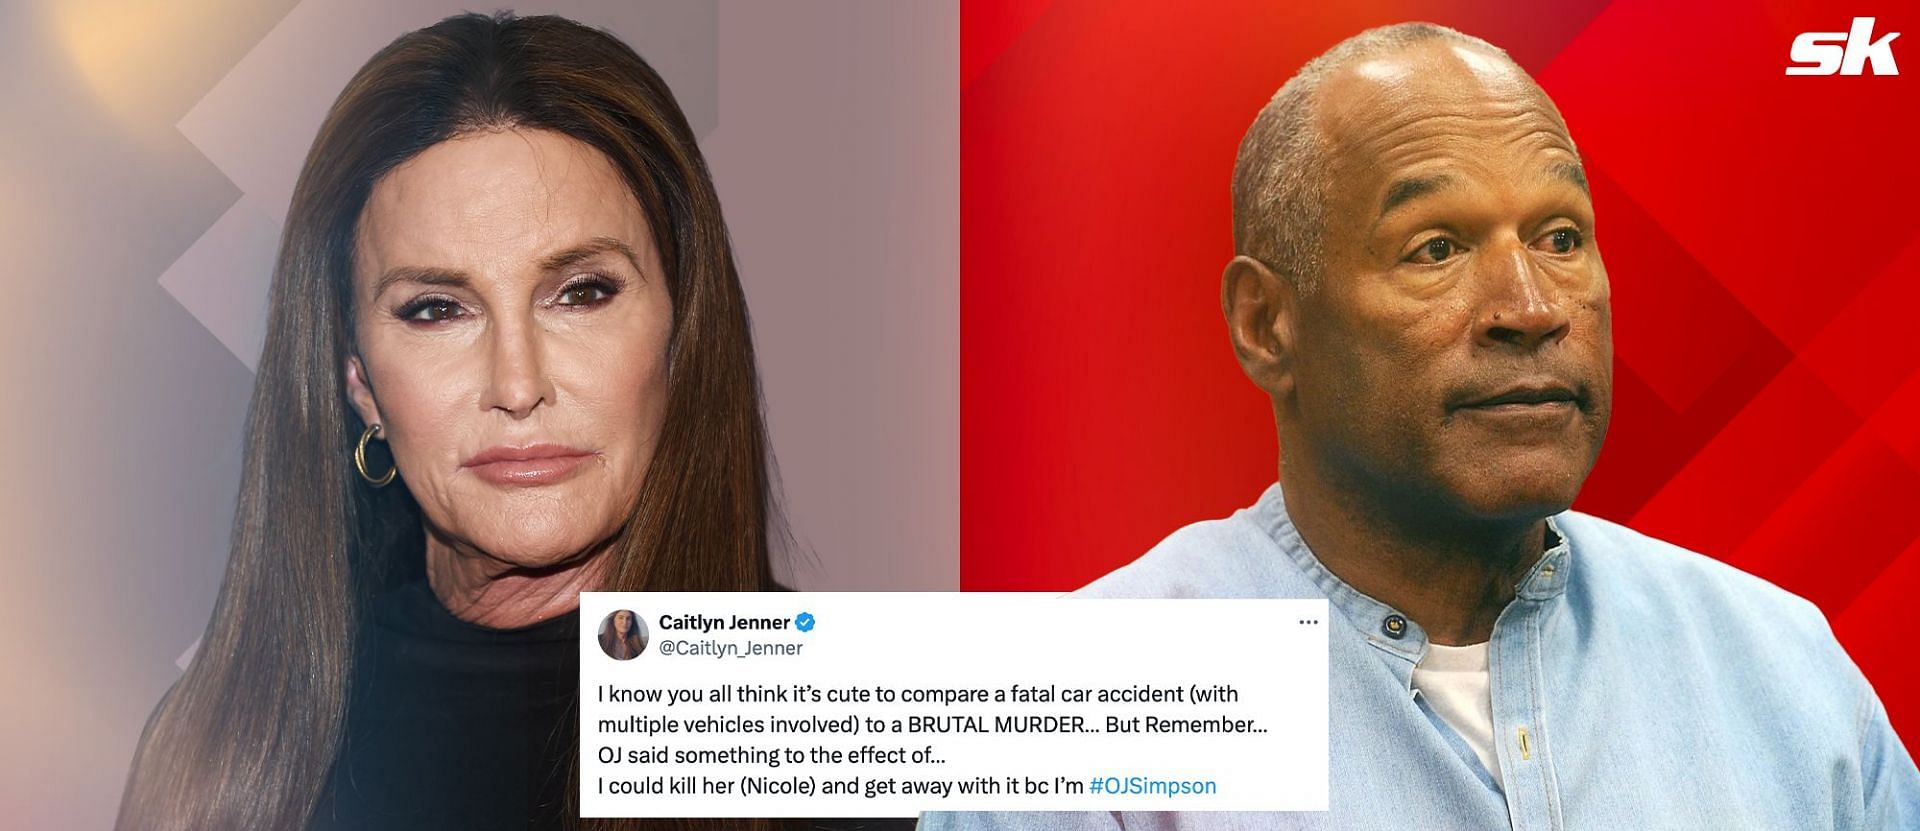 Caitlyn Jenner claps back at users comparing O.J. Simpson comment to fatal car crash